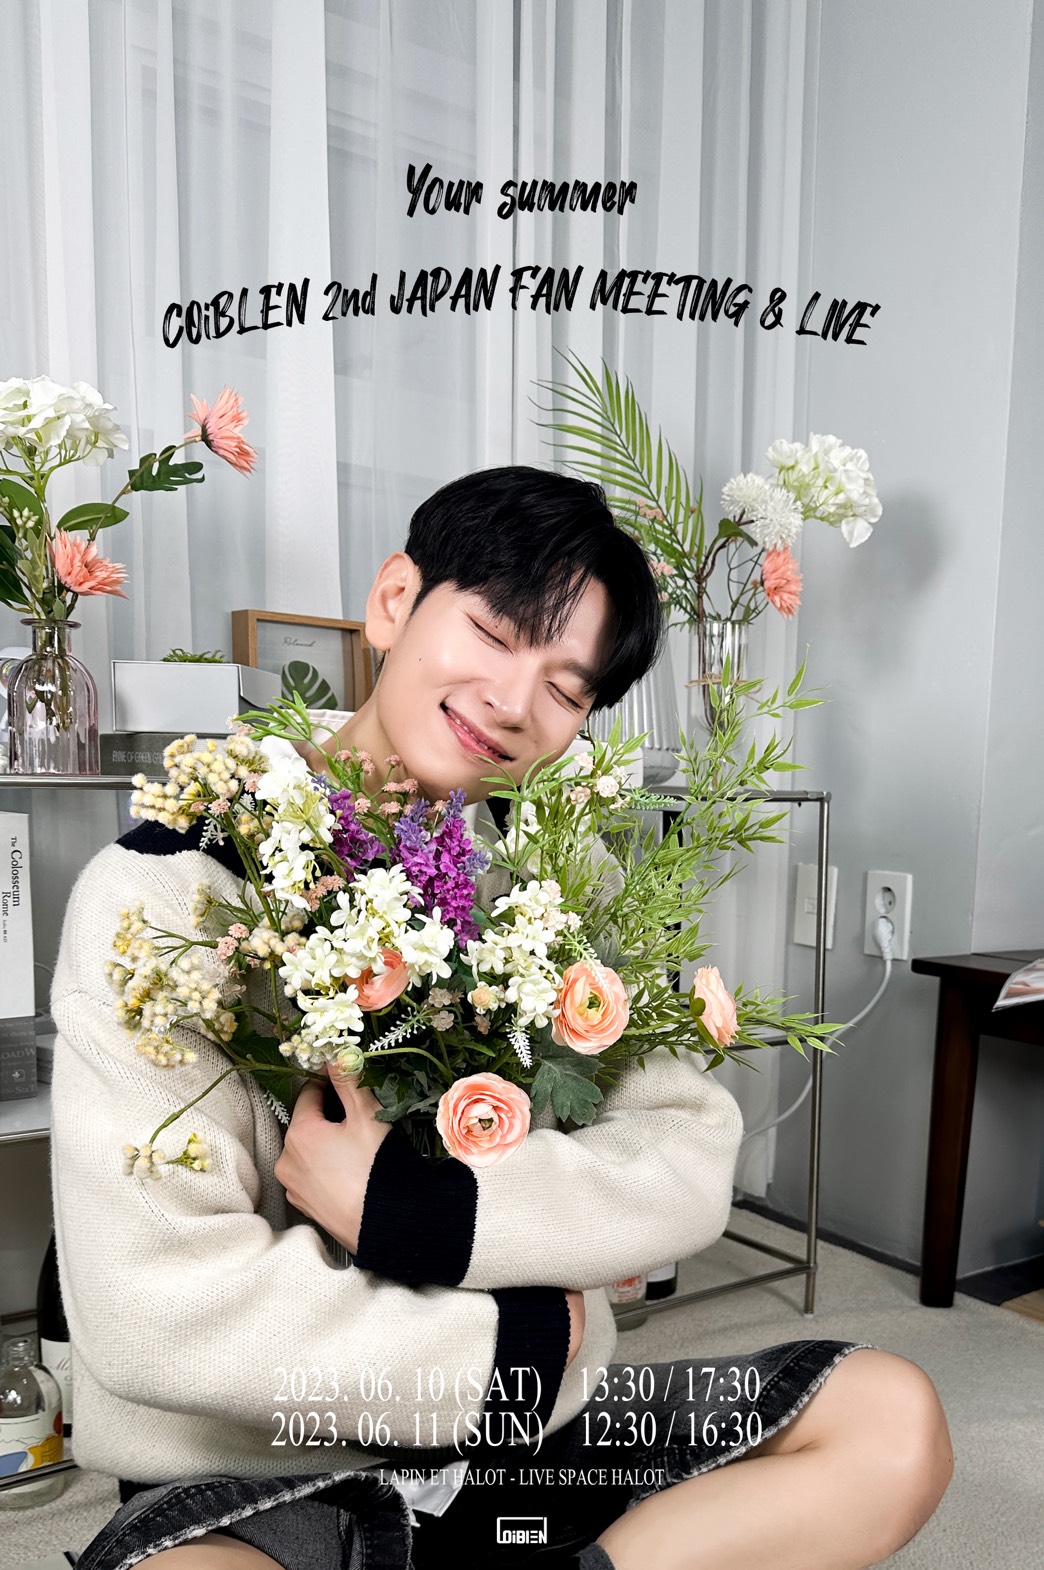 COiBLEN 2nd JAPAN FAN MEETING&LIVE-Your summer- [1部]